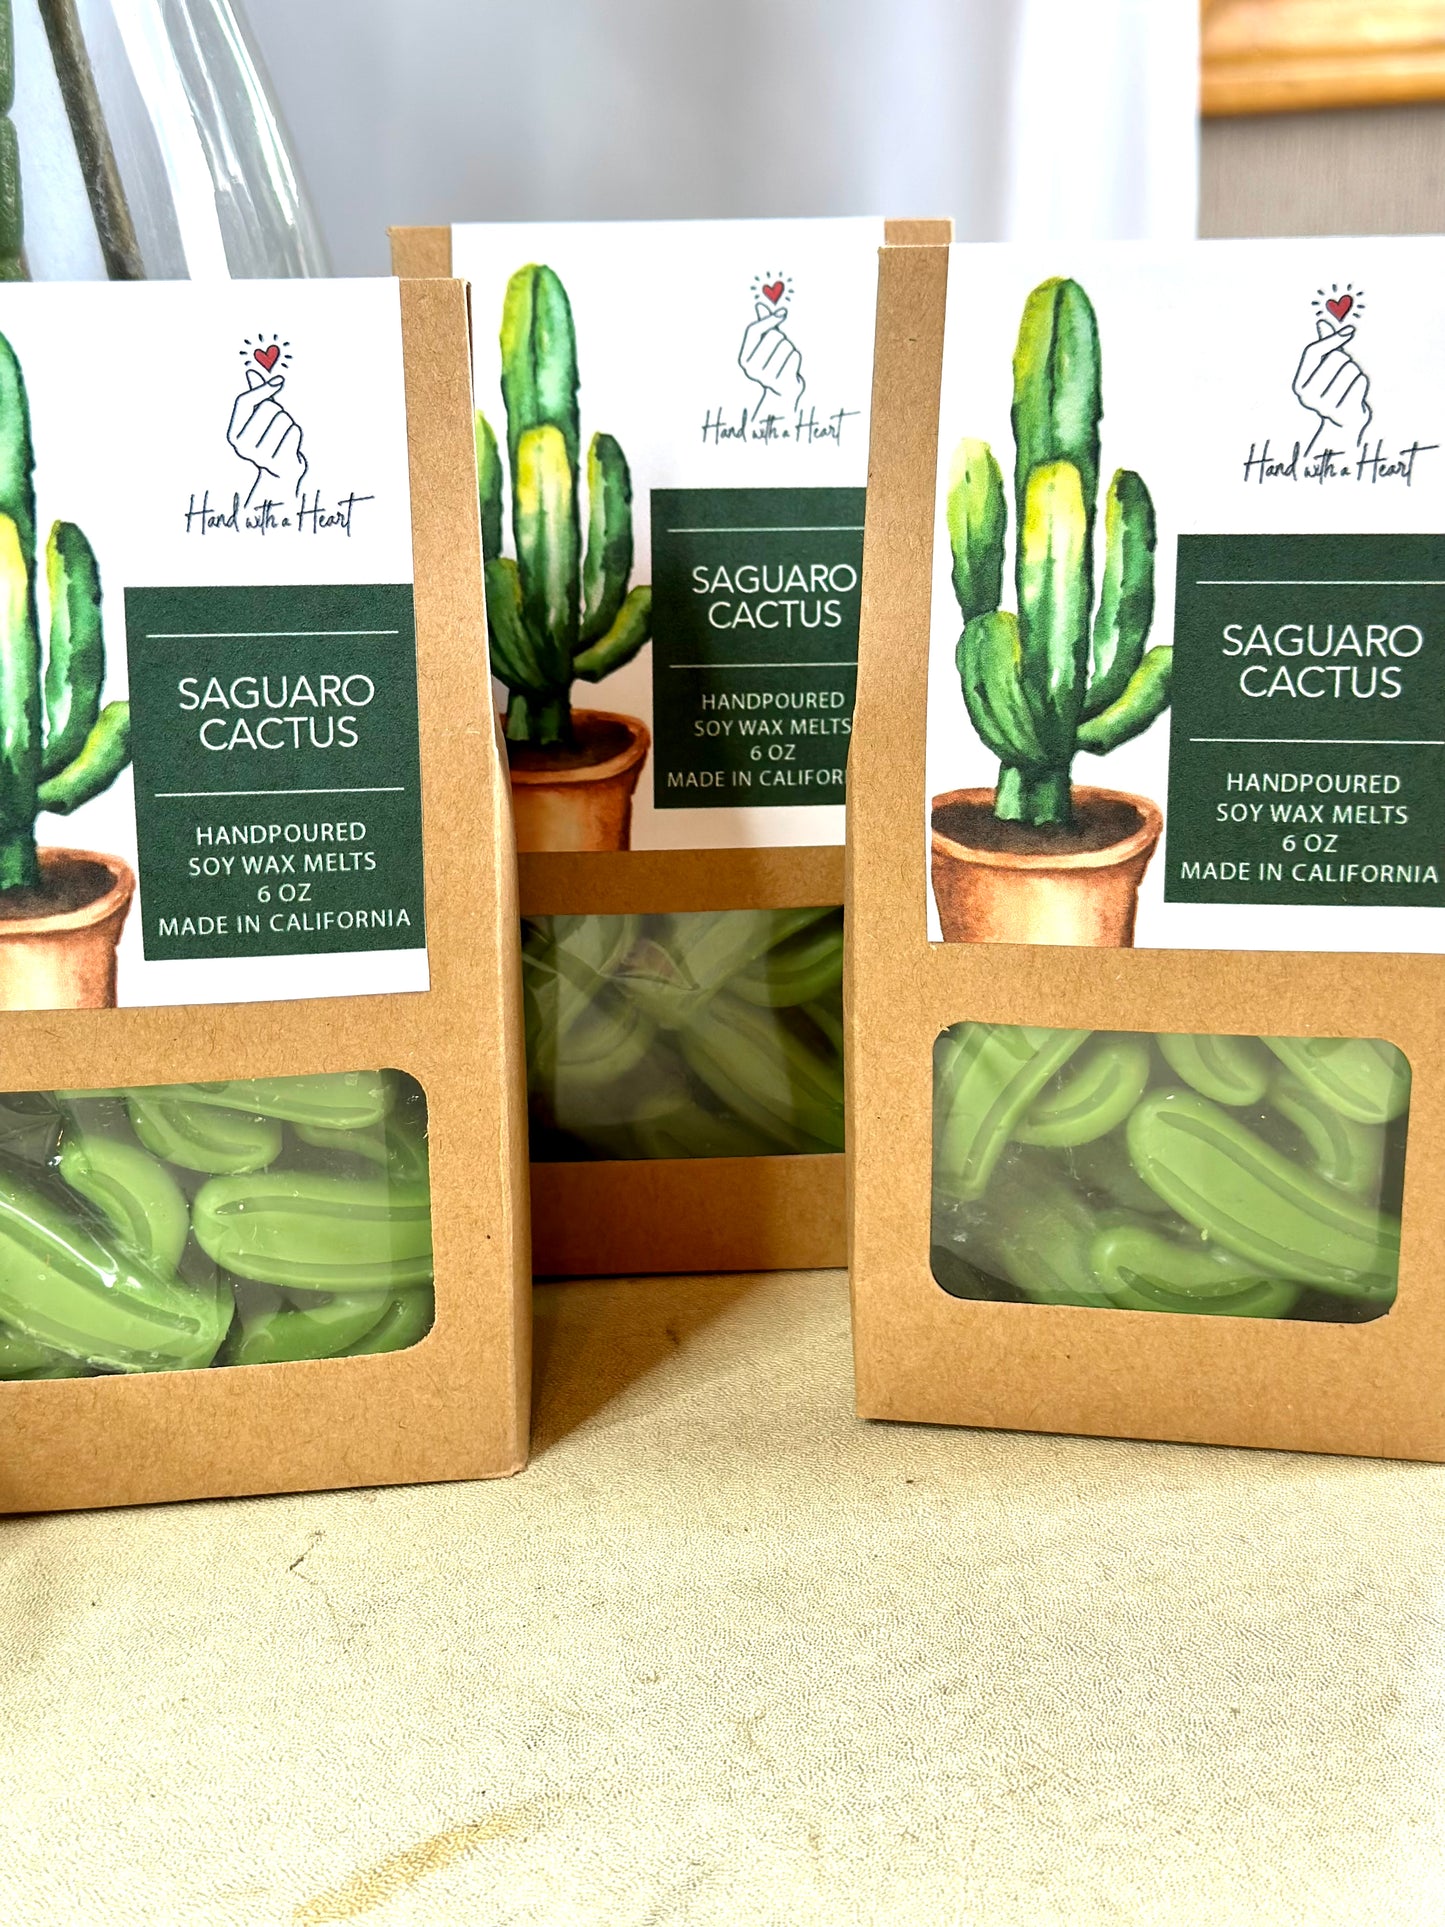 The Cactus Wax Melts